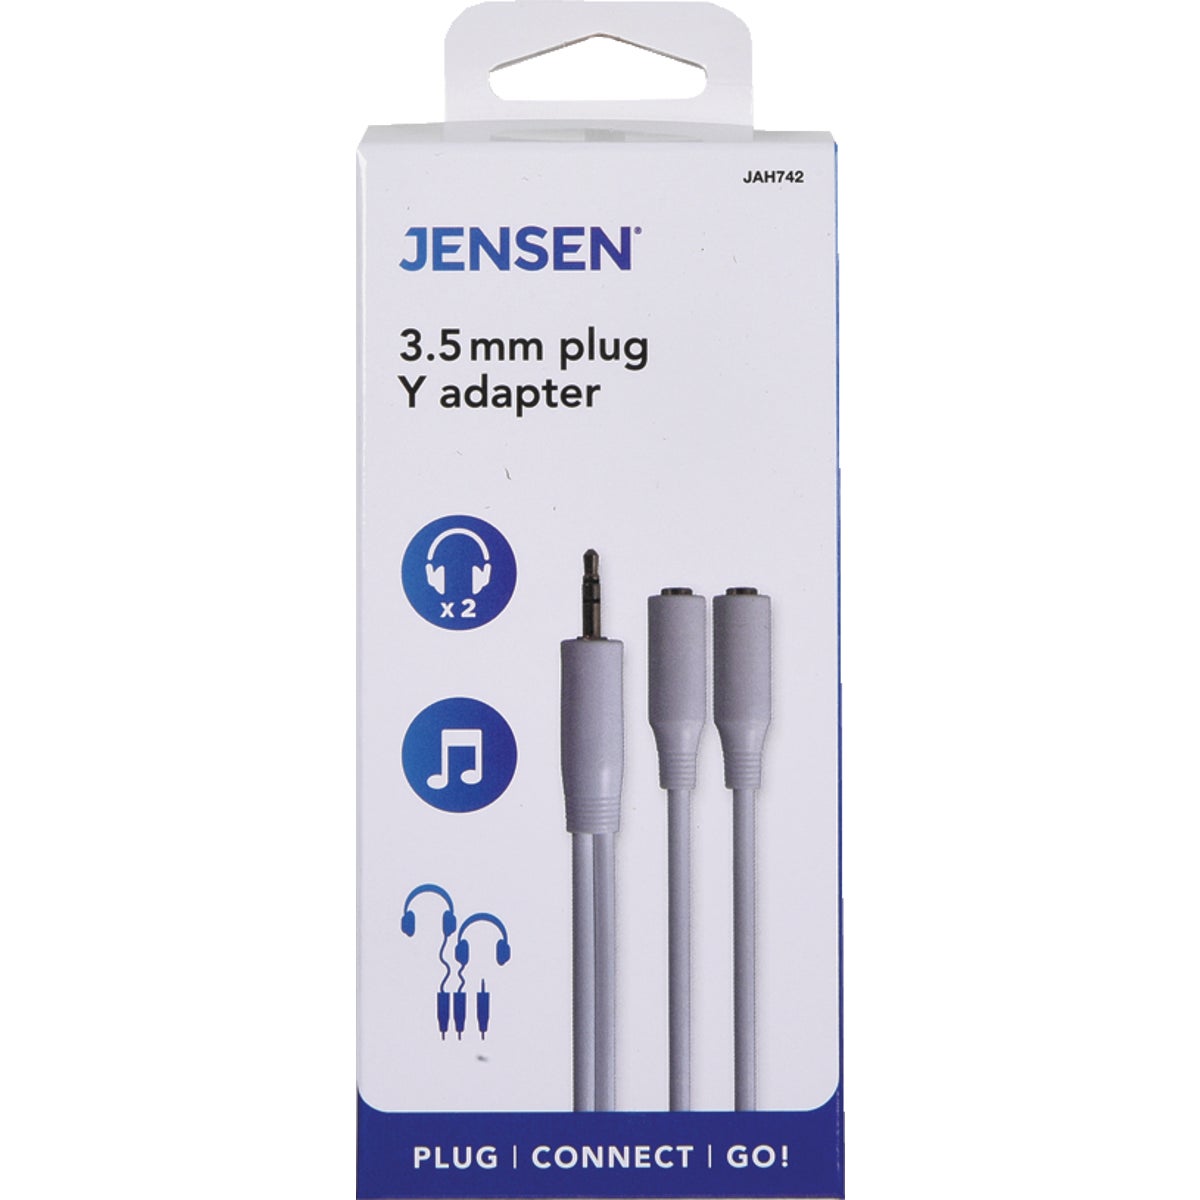 Item 516748, 3.5mm plug Y-adapter. 3-inch cable connects 2 headphones to a single 3.